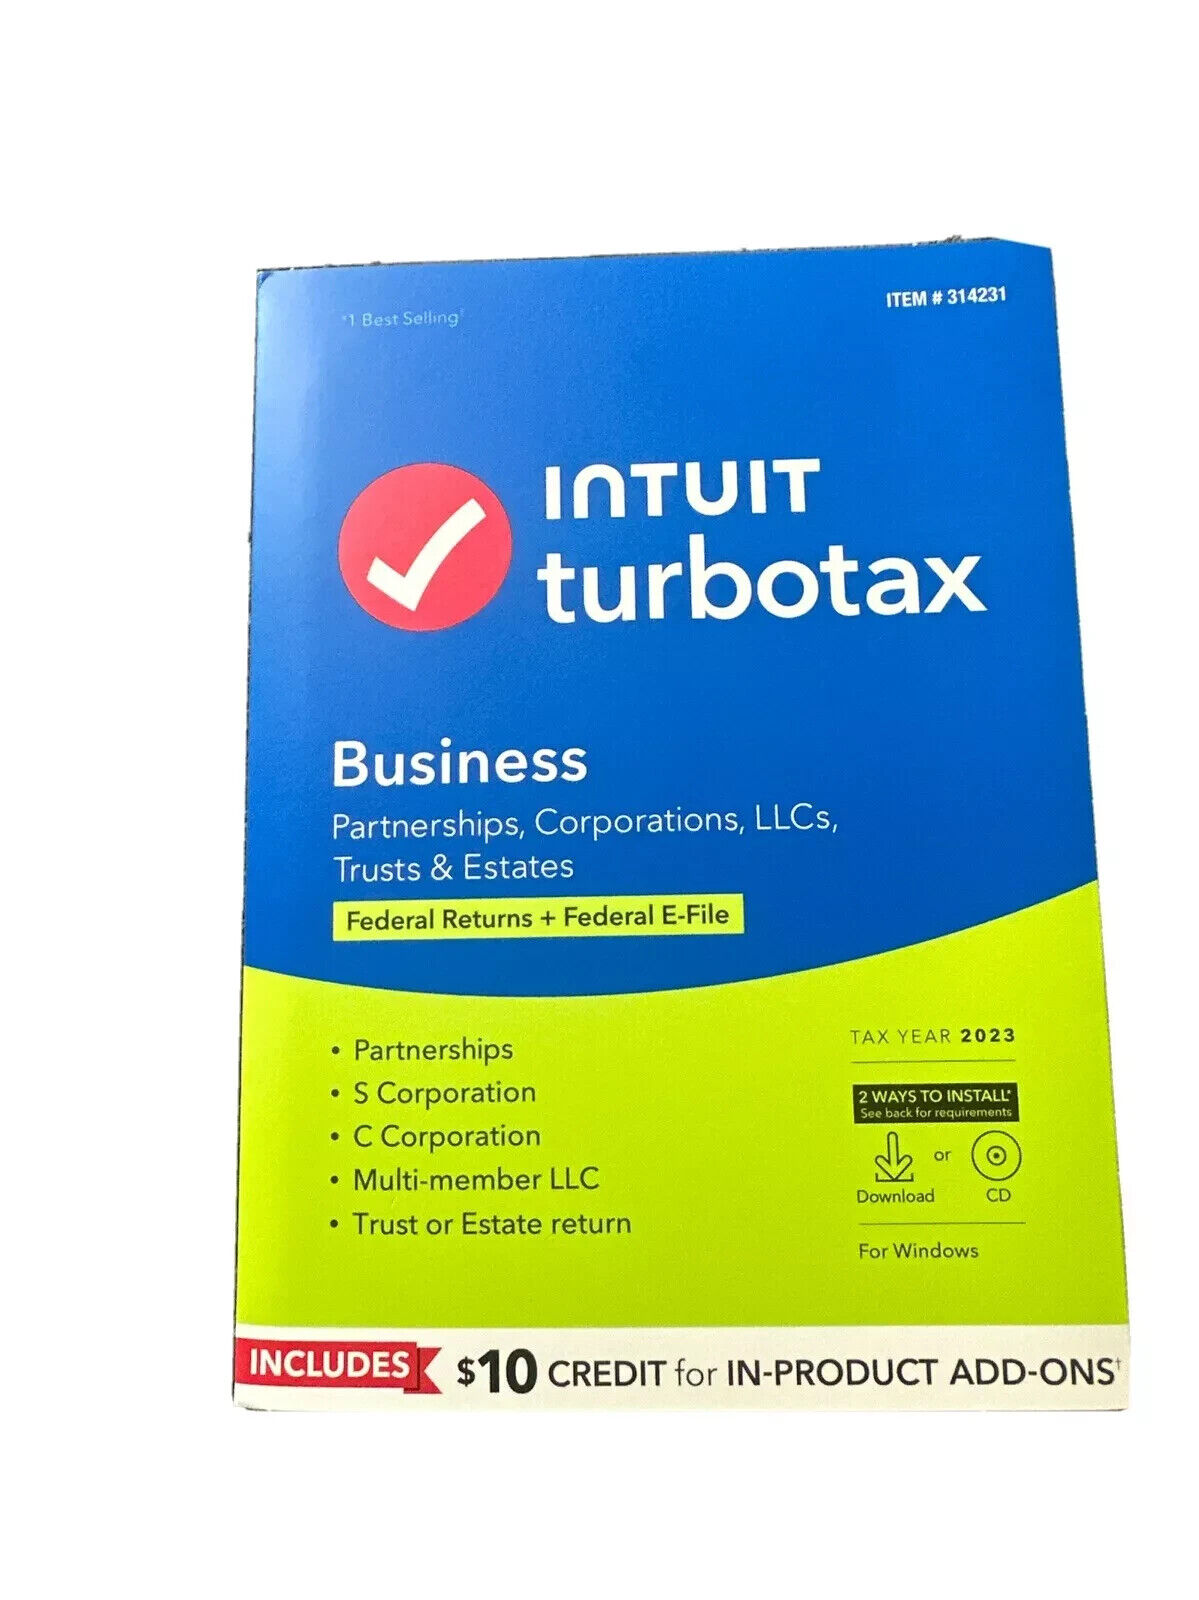 2023 Intuit Turbo Tax Business Partnerships Corps LLCs Tax Software WINDOWS ONLY